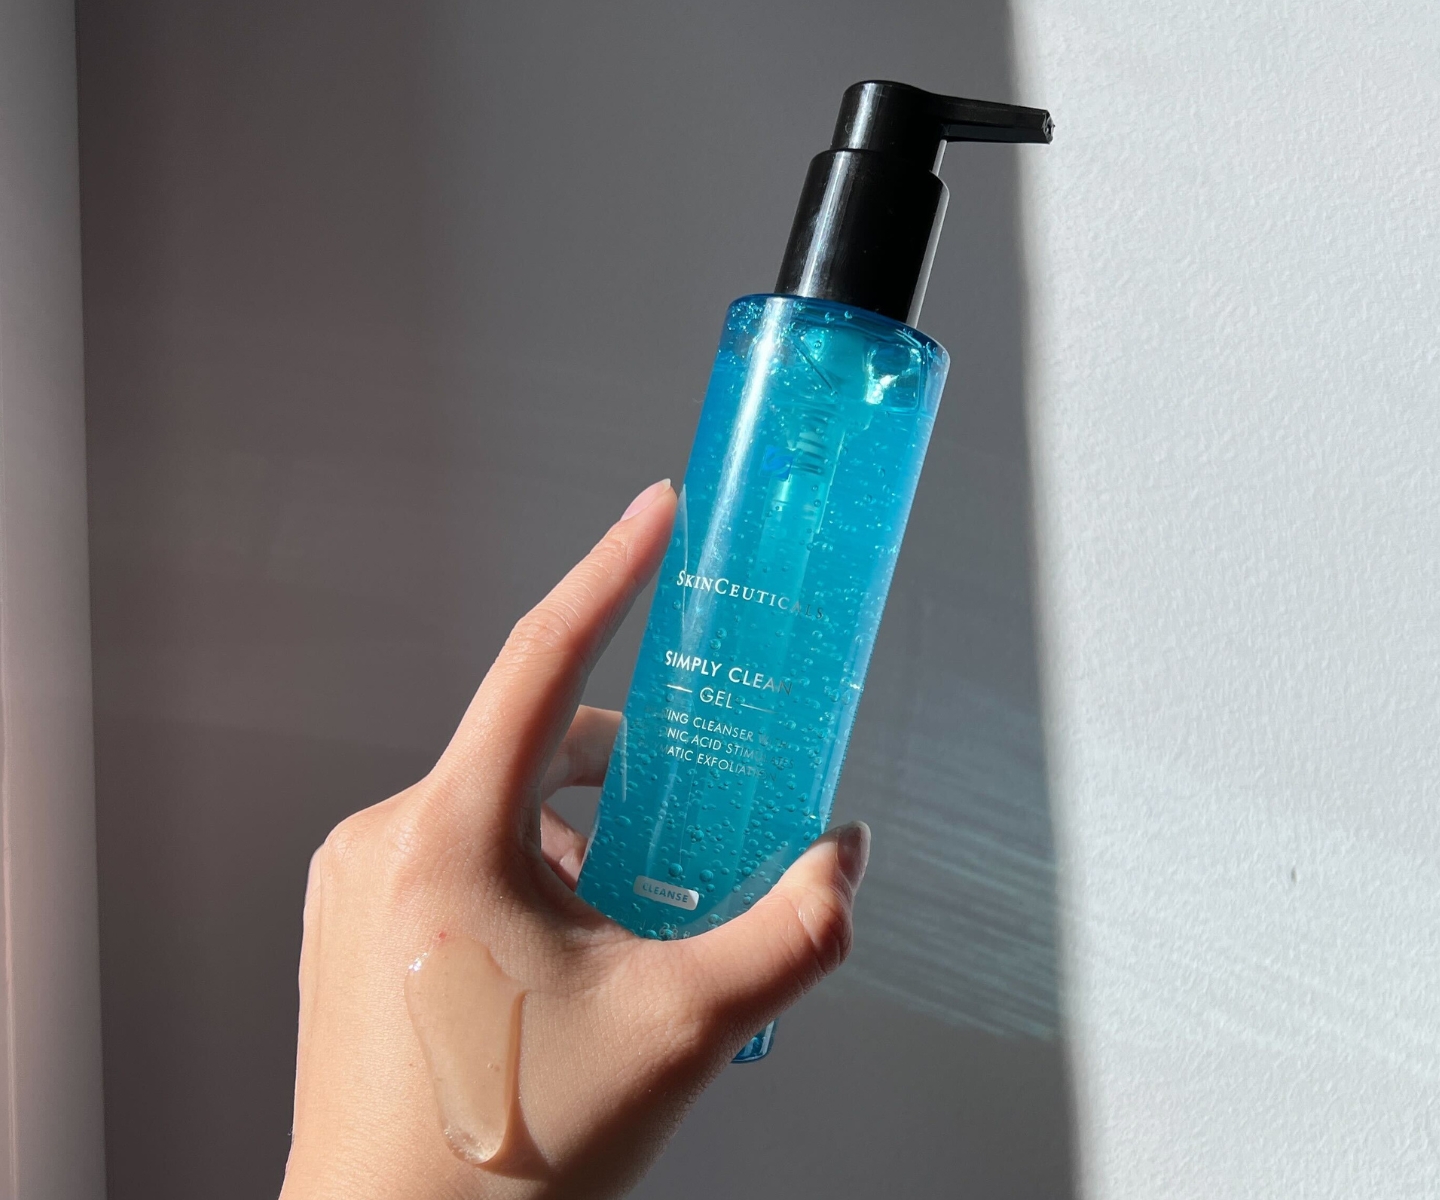 SkinCeuticals Simply Clean in-article